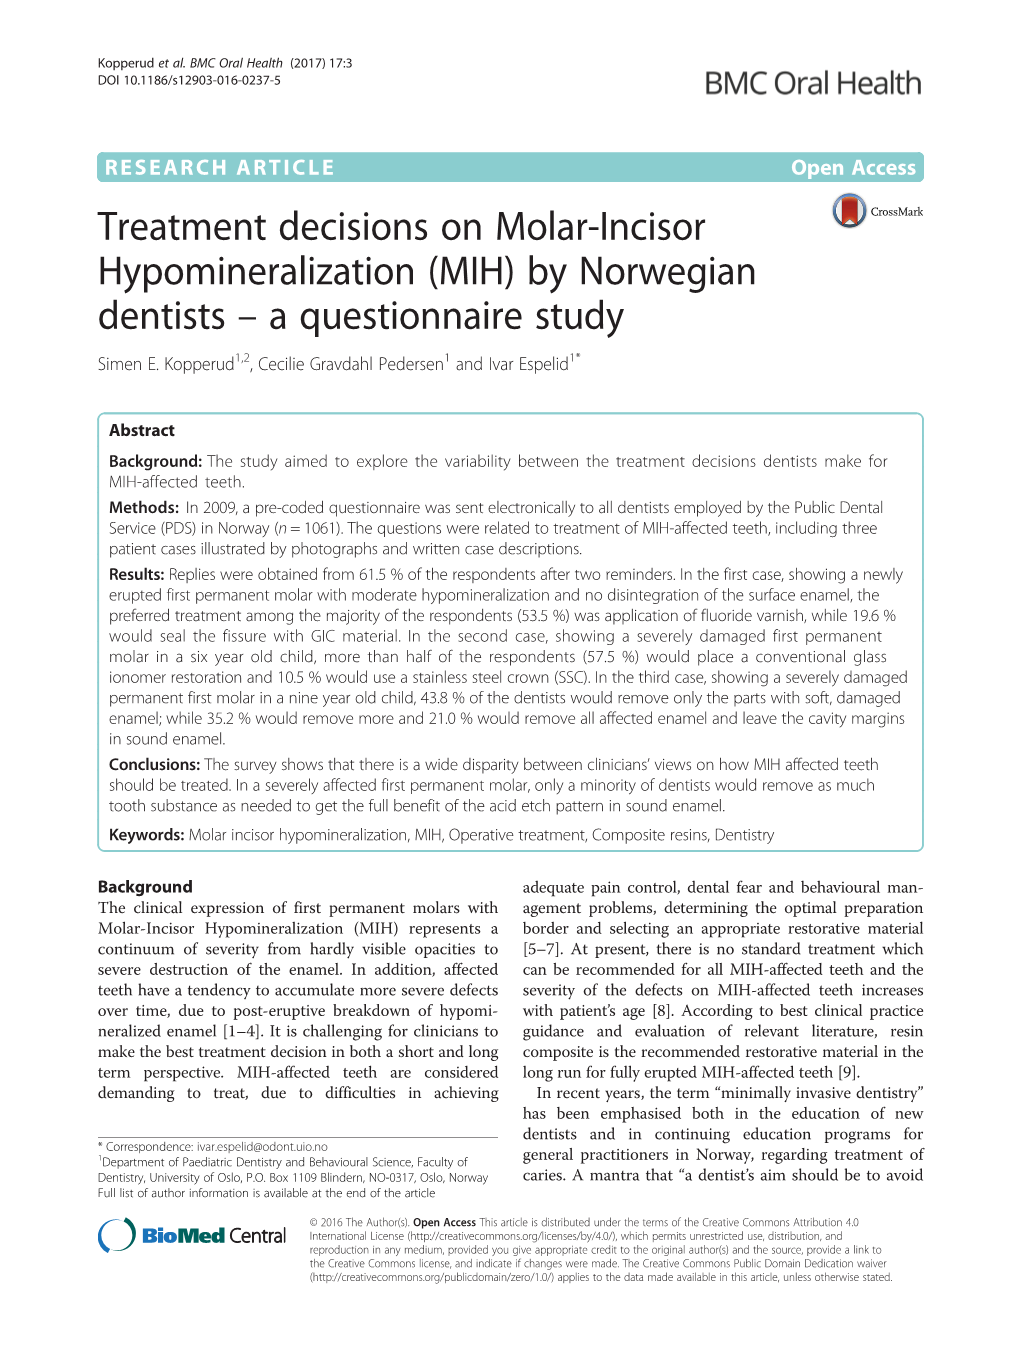 Treatment Decisions on Molar-Incisor Hypomineralization (MIH) by Norwegian Dentists – a Questionnaire Study Simen E